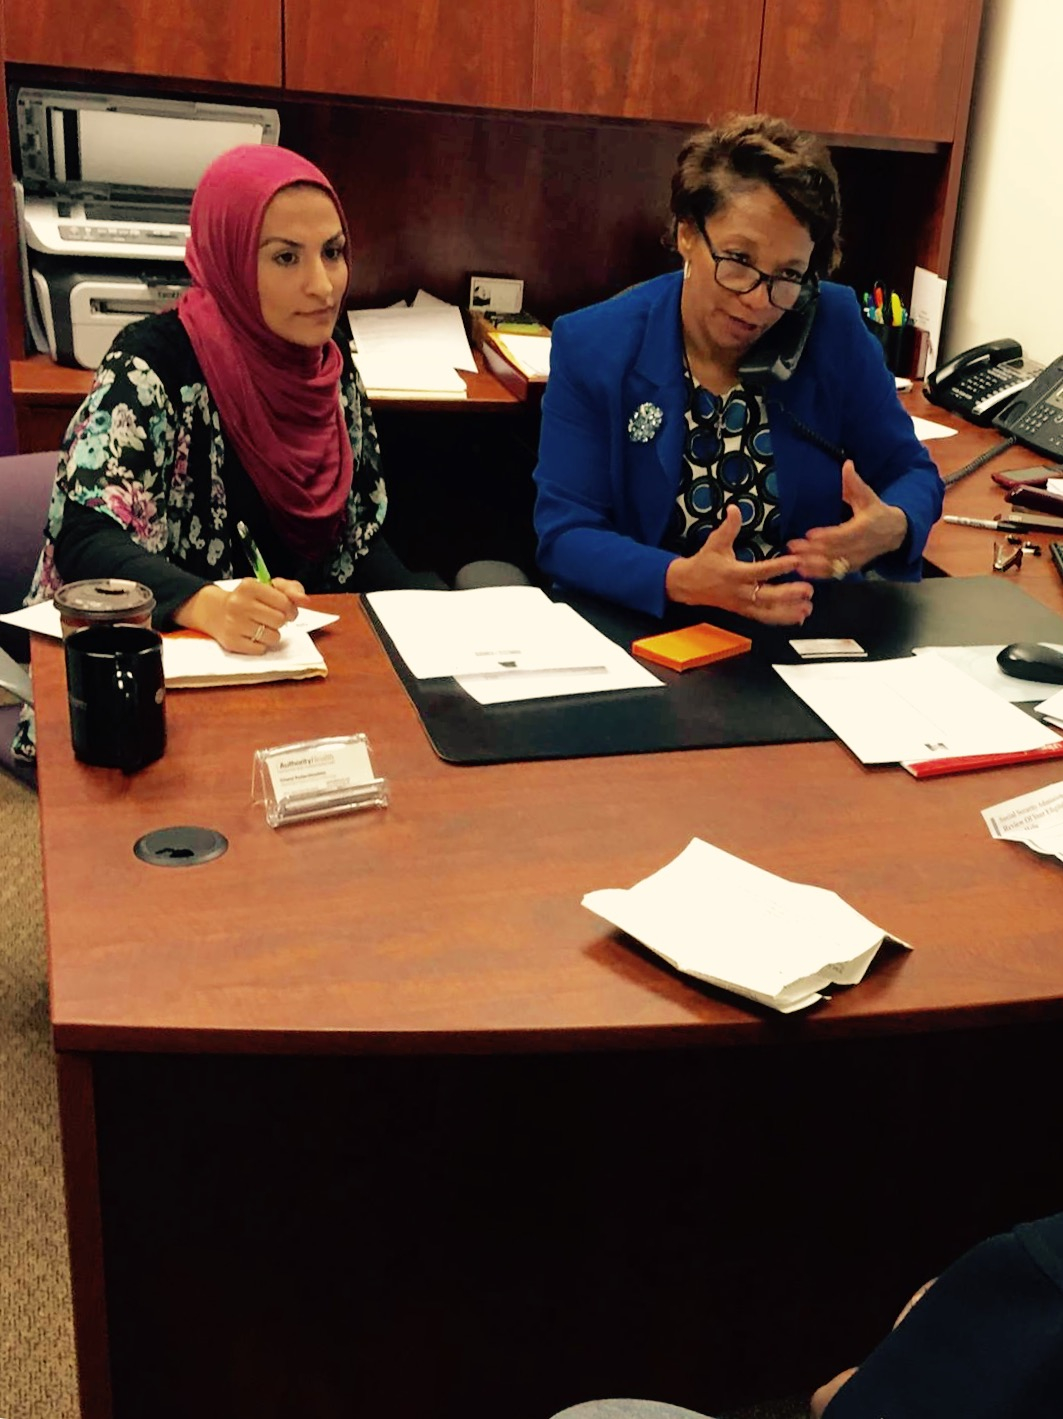 Gadah Sharif and Julie Roddy in an office sitting behind a desk. Julie is on the phone while Gadah is writing on a notepad.